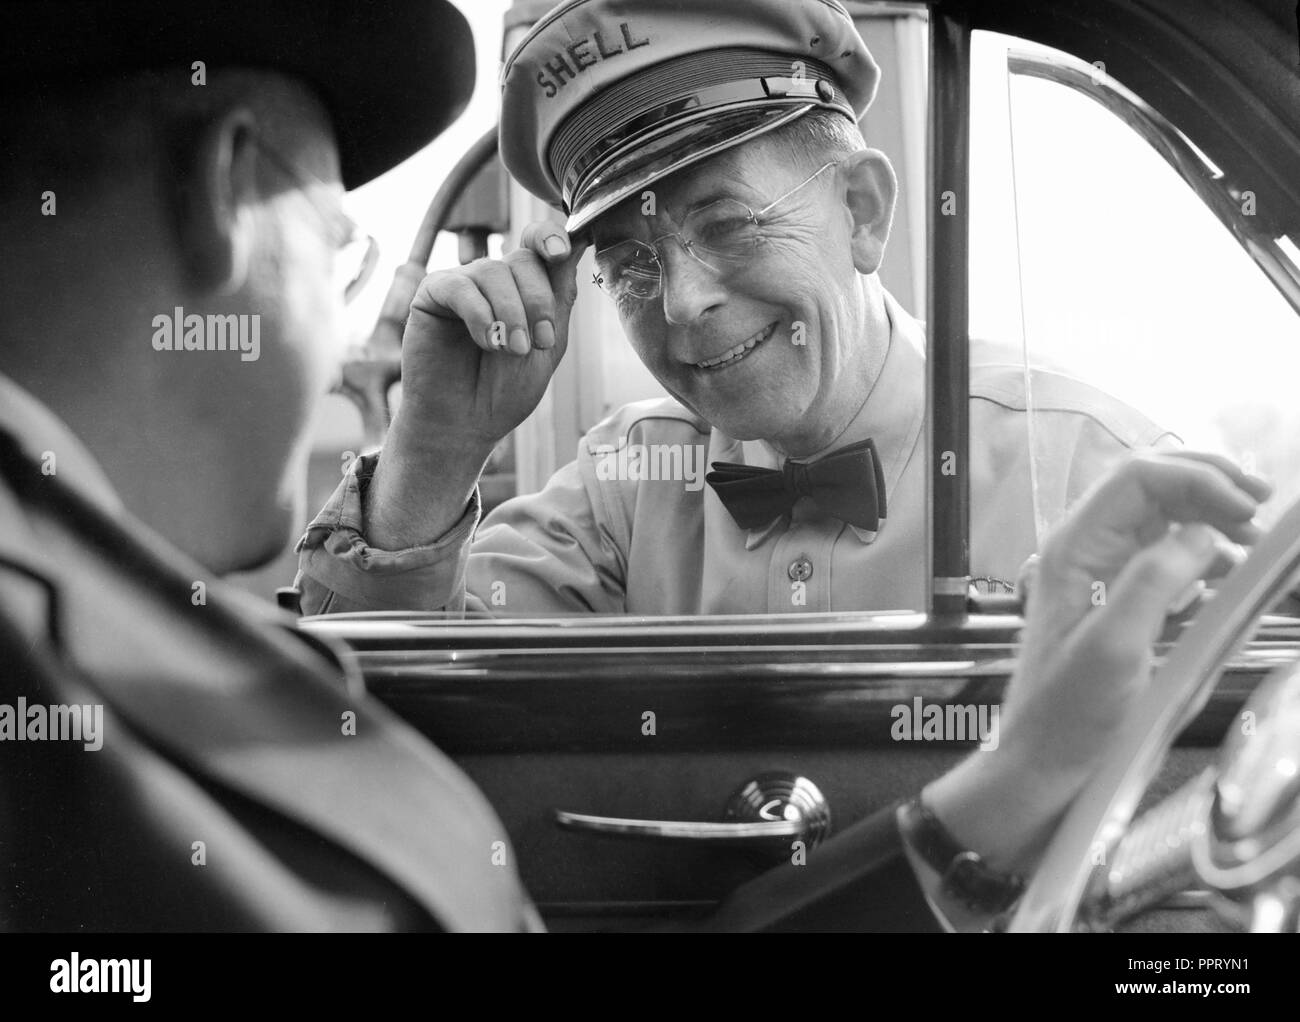 A Shell gas station worker tips his hat to a driver during a service stop, ca. 1940. Stock Photo